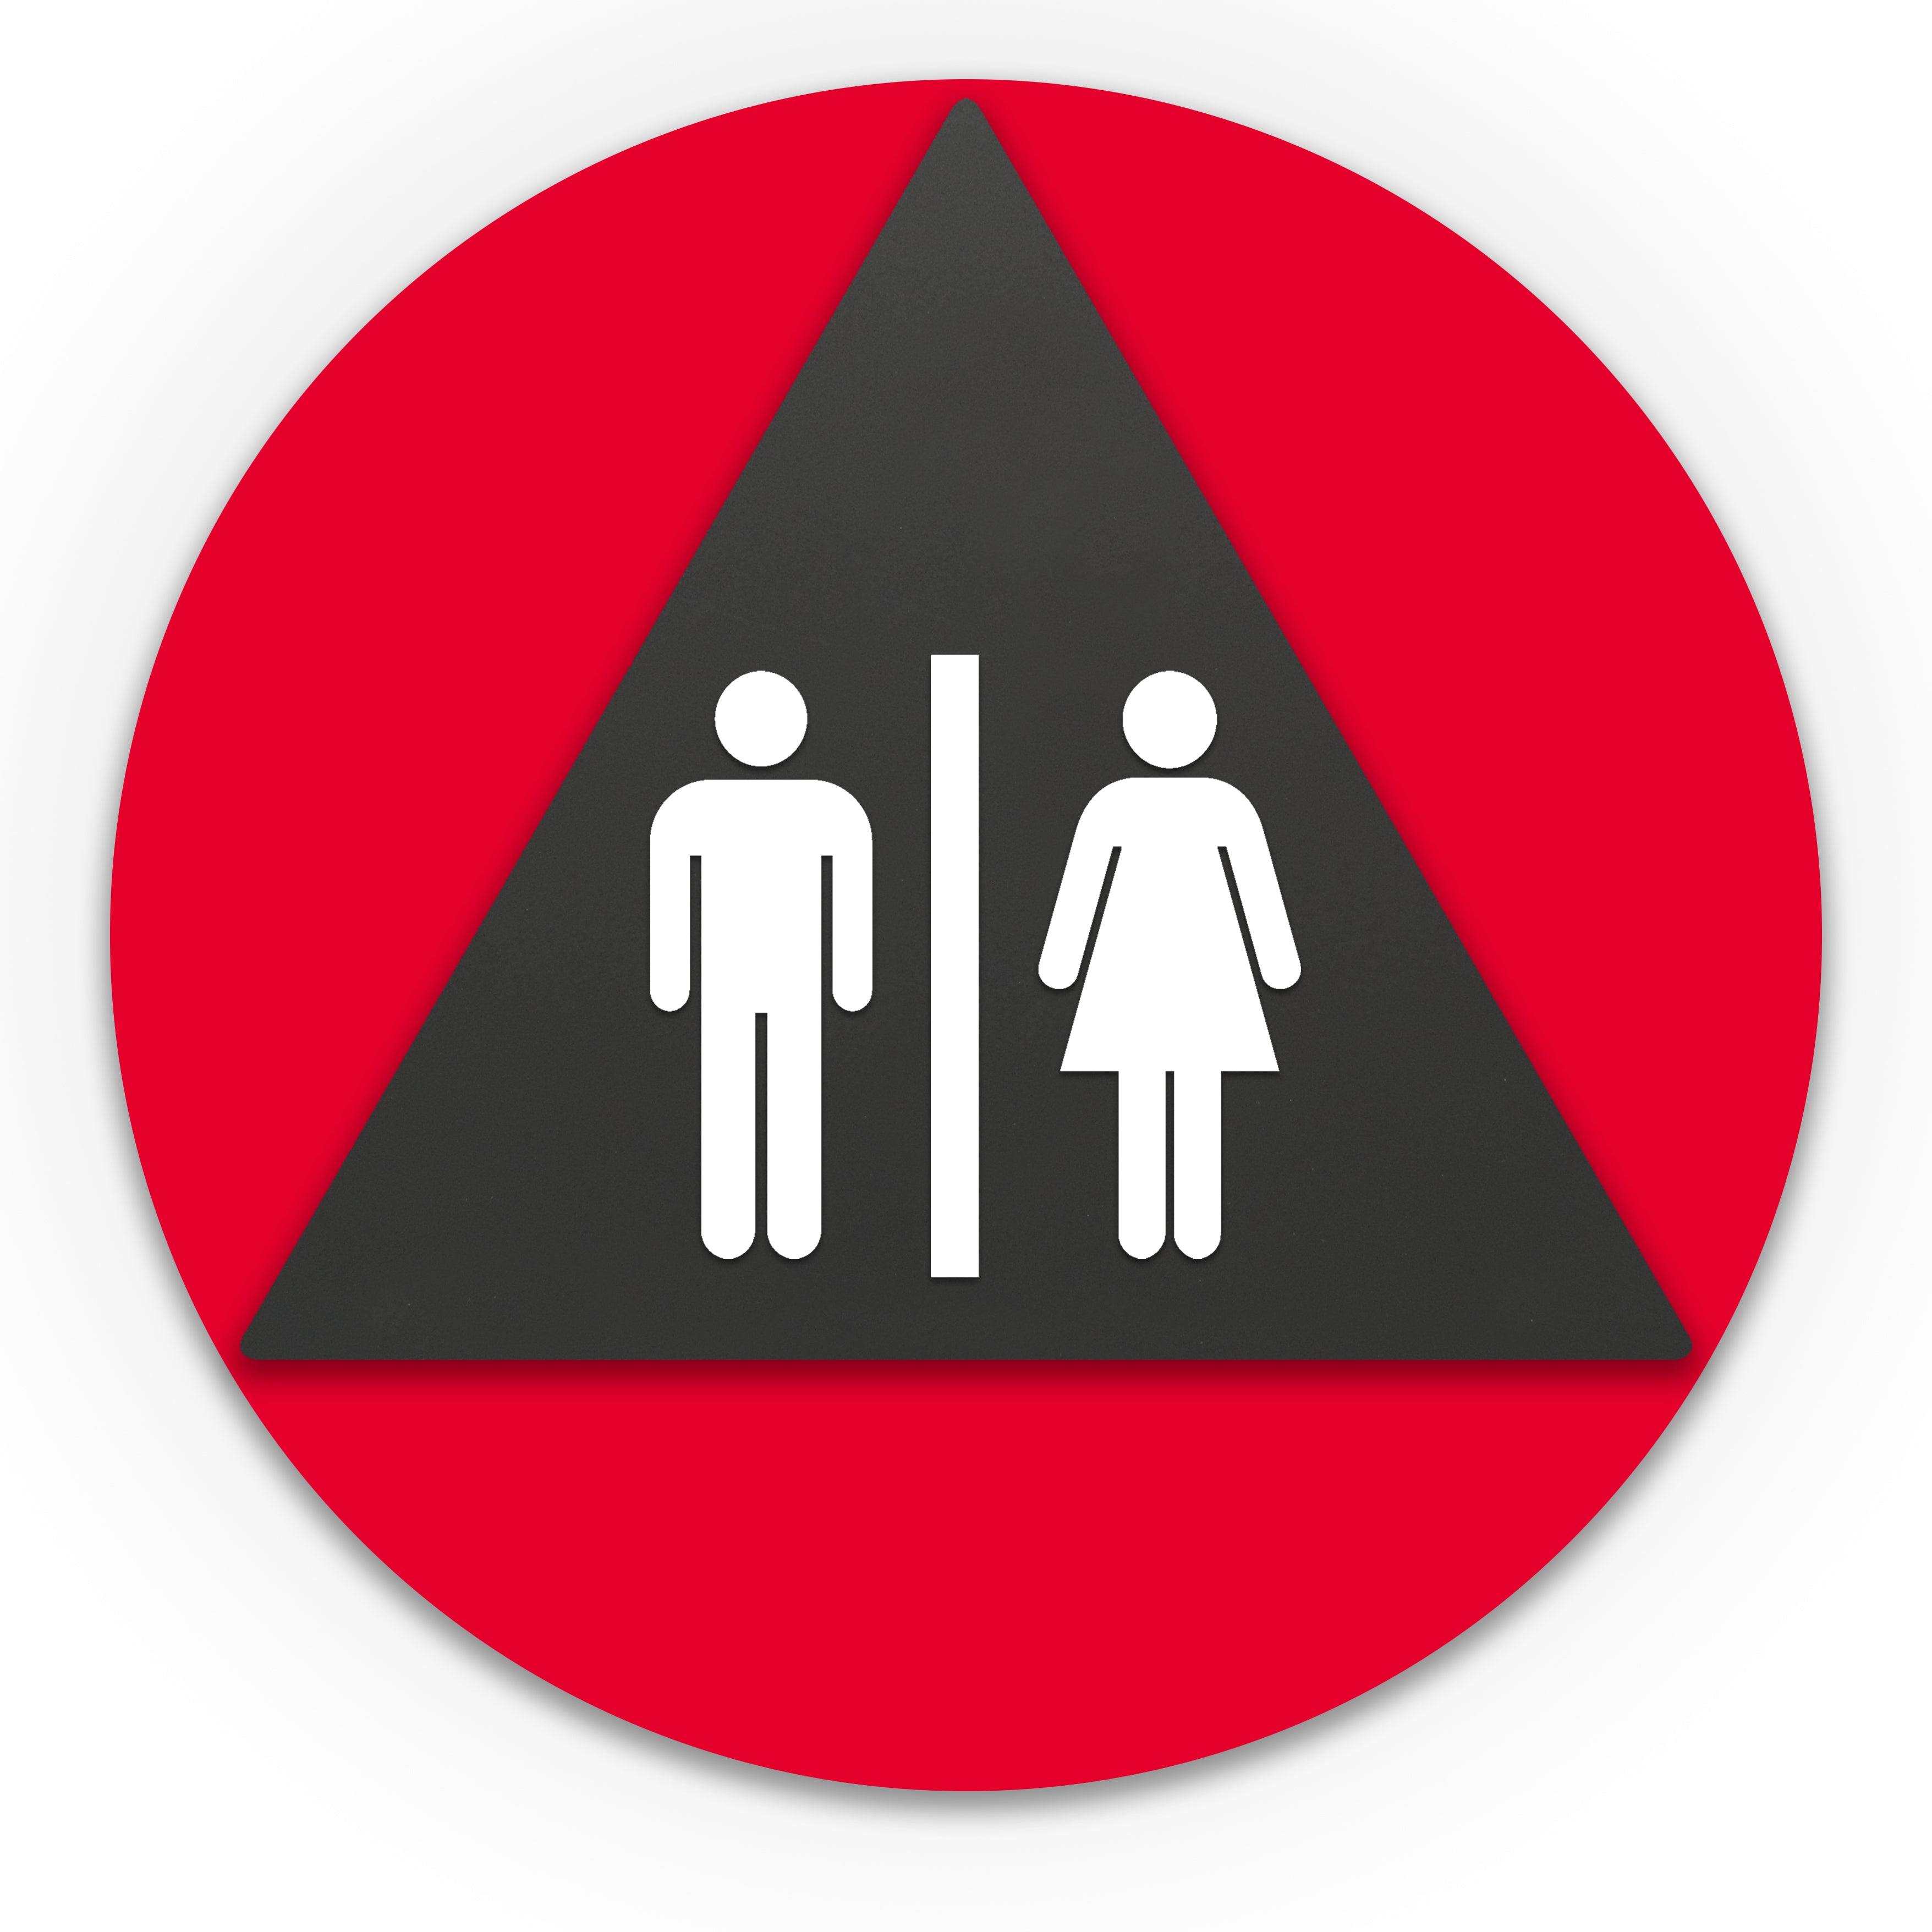 Title 24 California Ada Accessible Unisex Restroom Sign With Symbol 5533